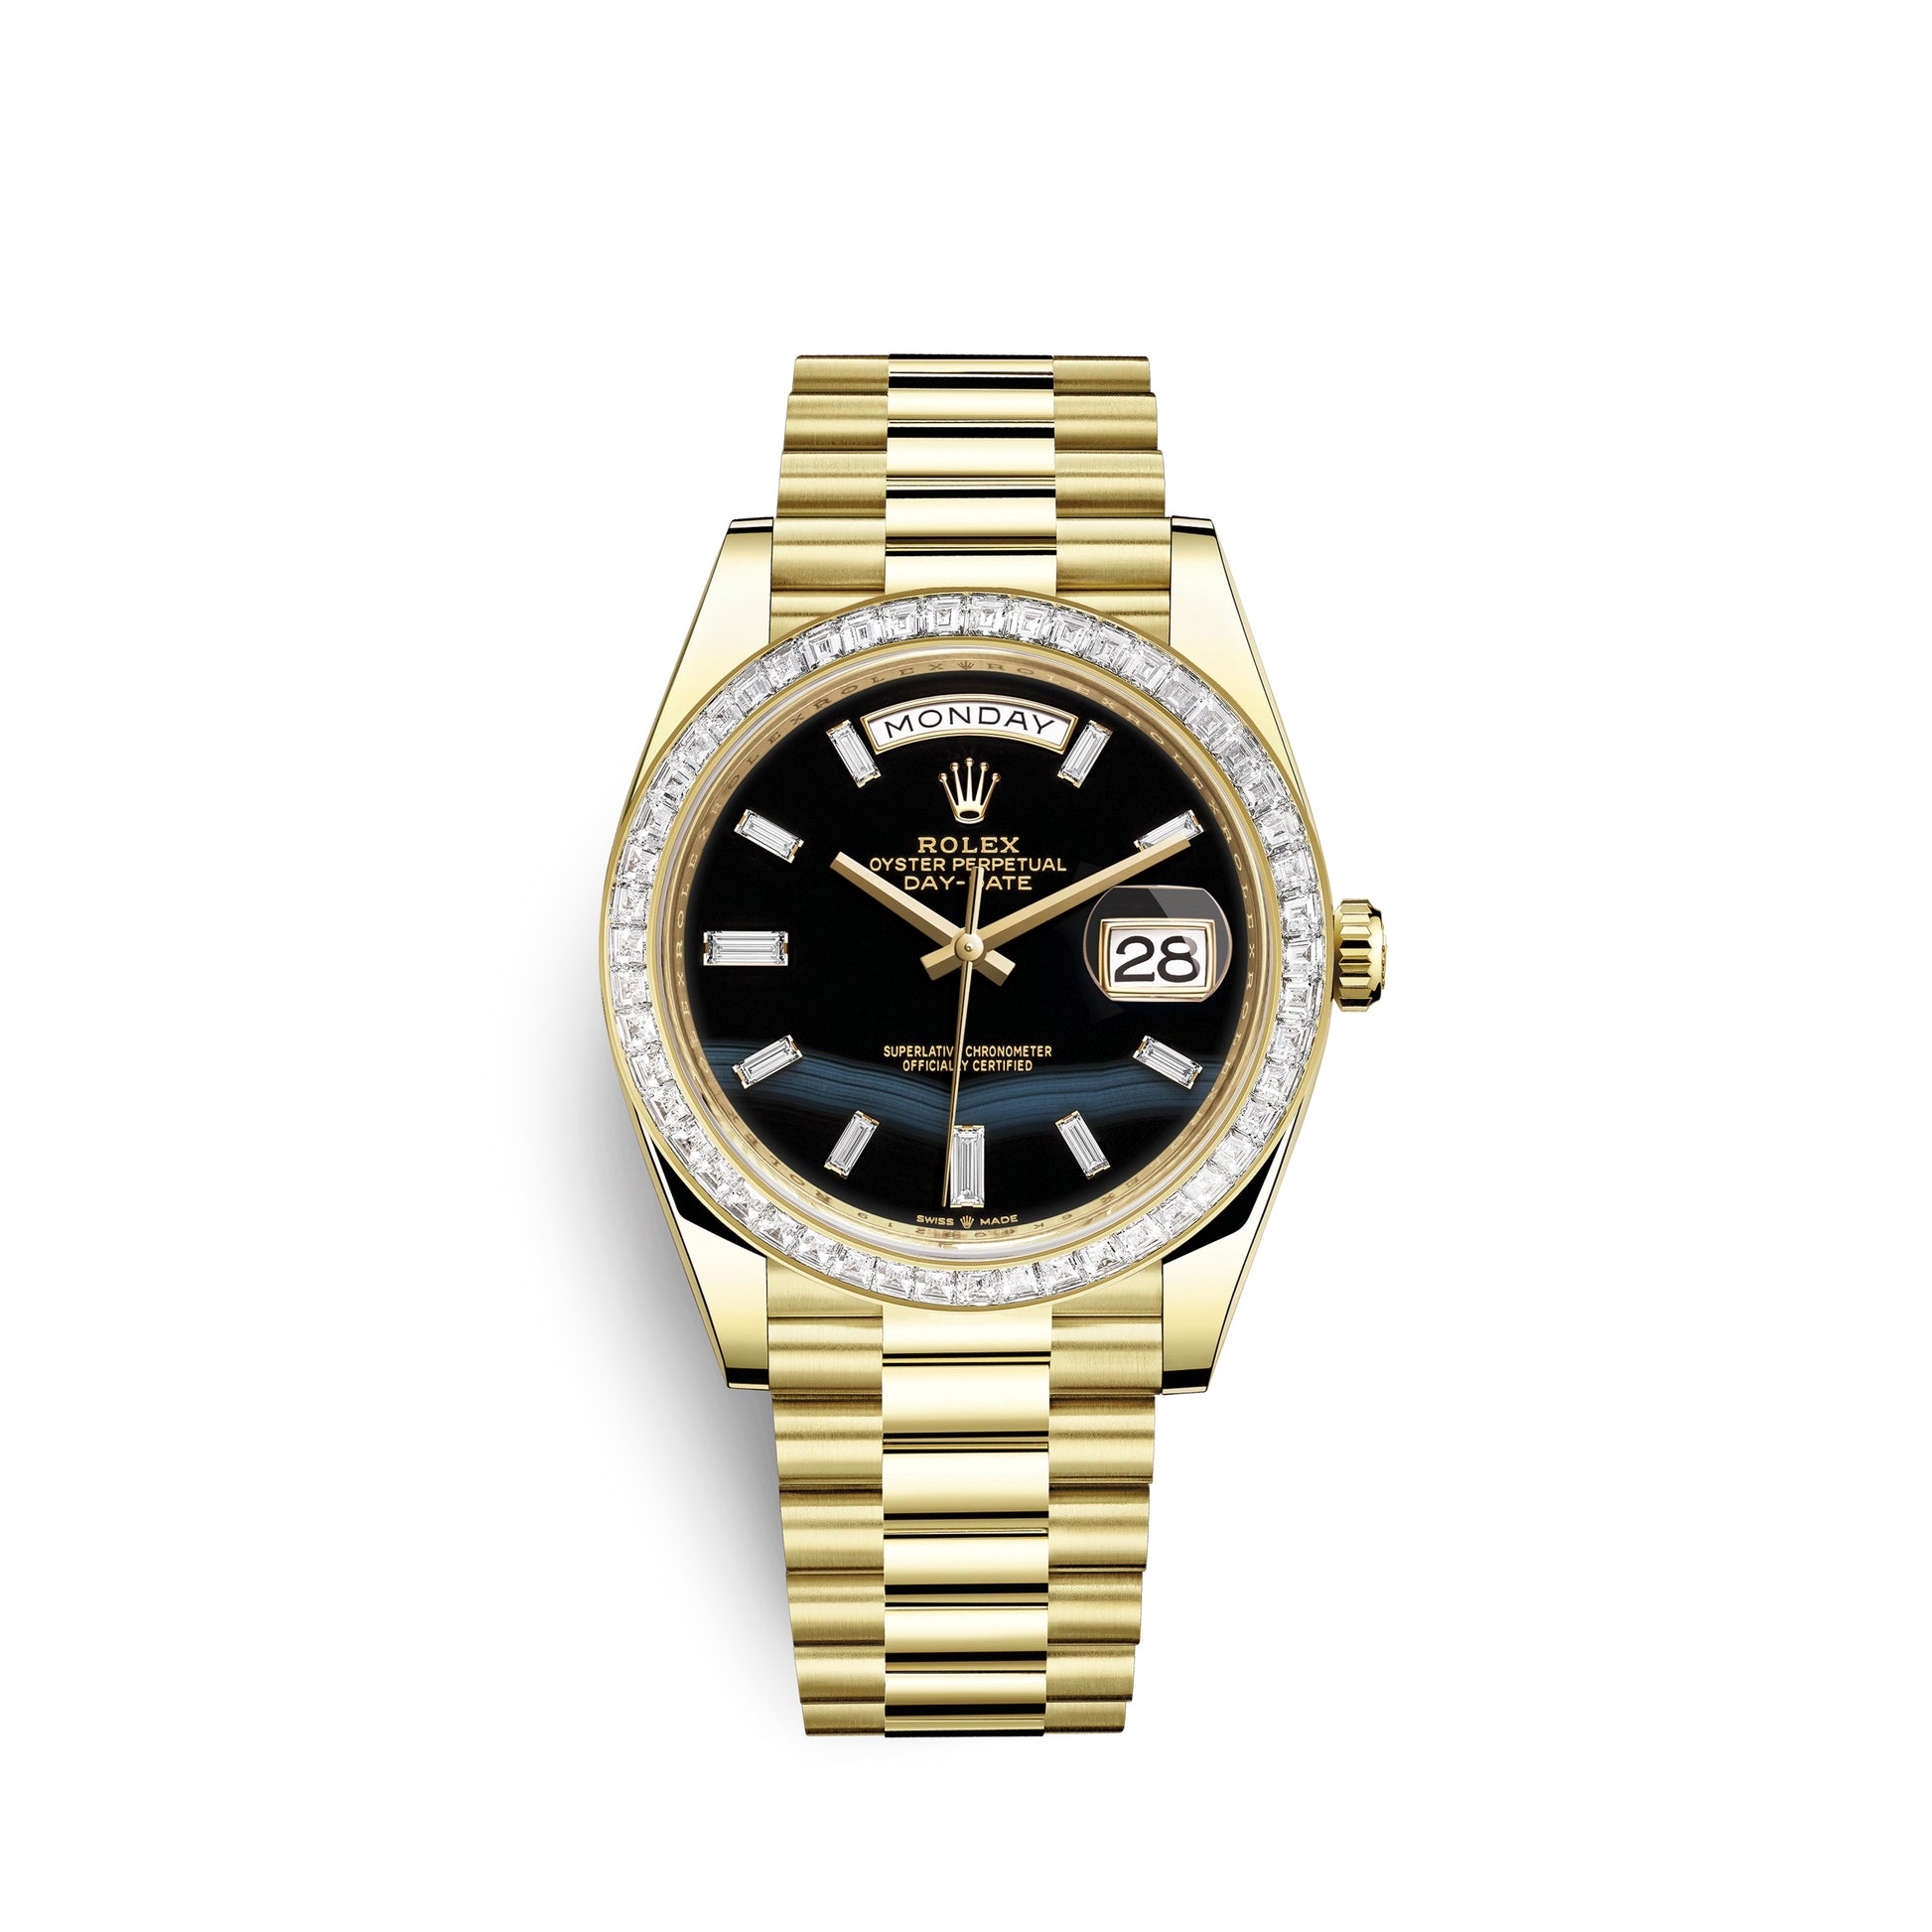 Rolex Day-Date, 40mm, 18k Yellow Gold and Diamonds, Ref# 228398tbr-0038